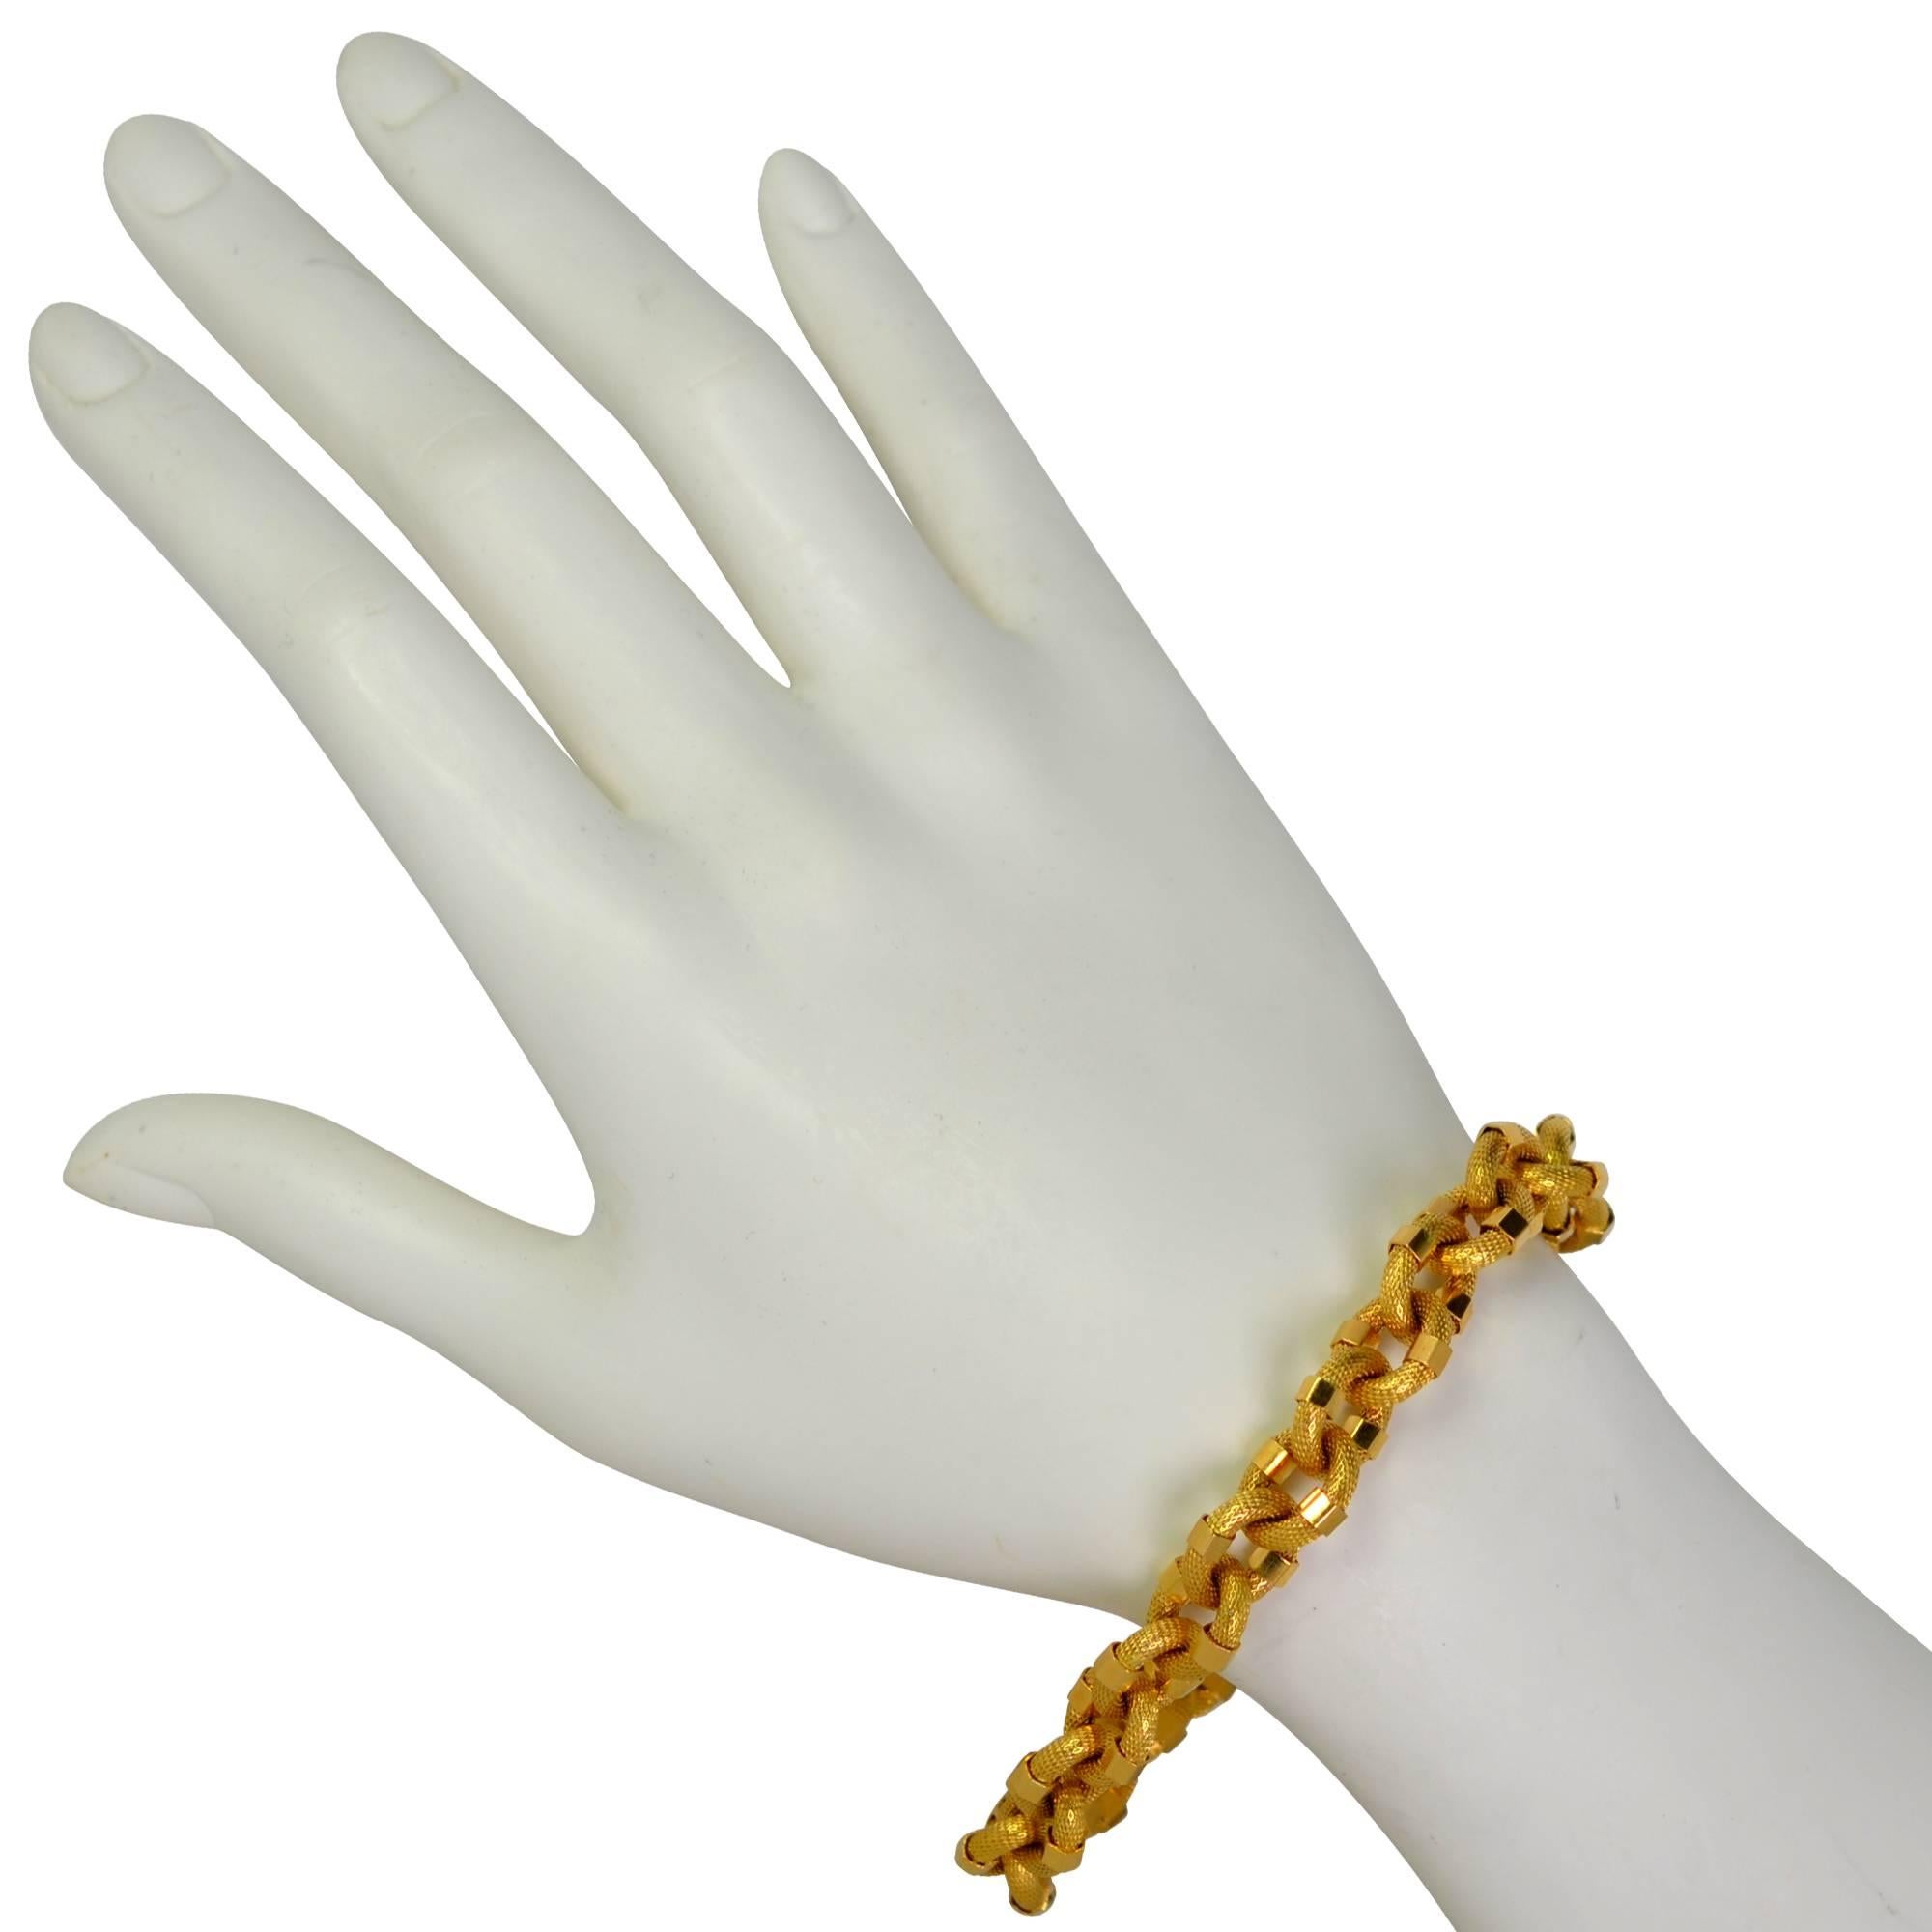 18k yellow gold bracelet featuring textured links accented with high polish hexagonal gold bolts.

This modernistic bracelet measures 8.5 inches in length by .5 inches in width.
It is stamped and/or tested as 18k gold.
The metal weight is 23.32